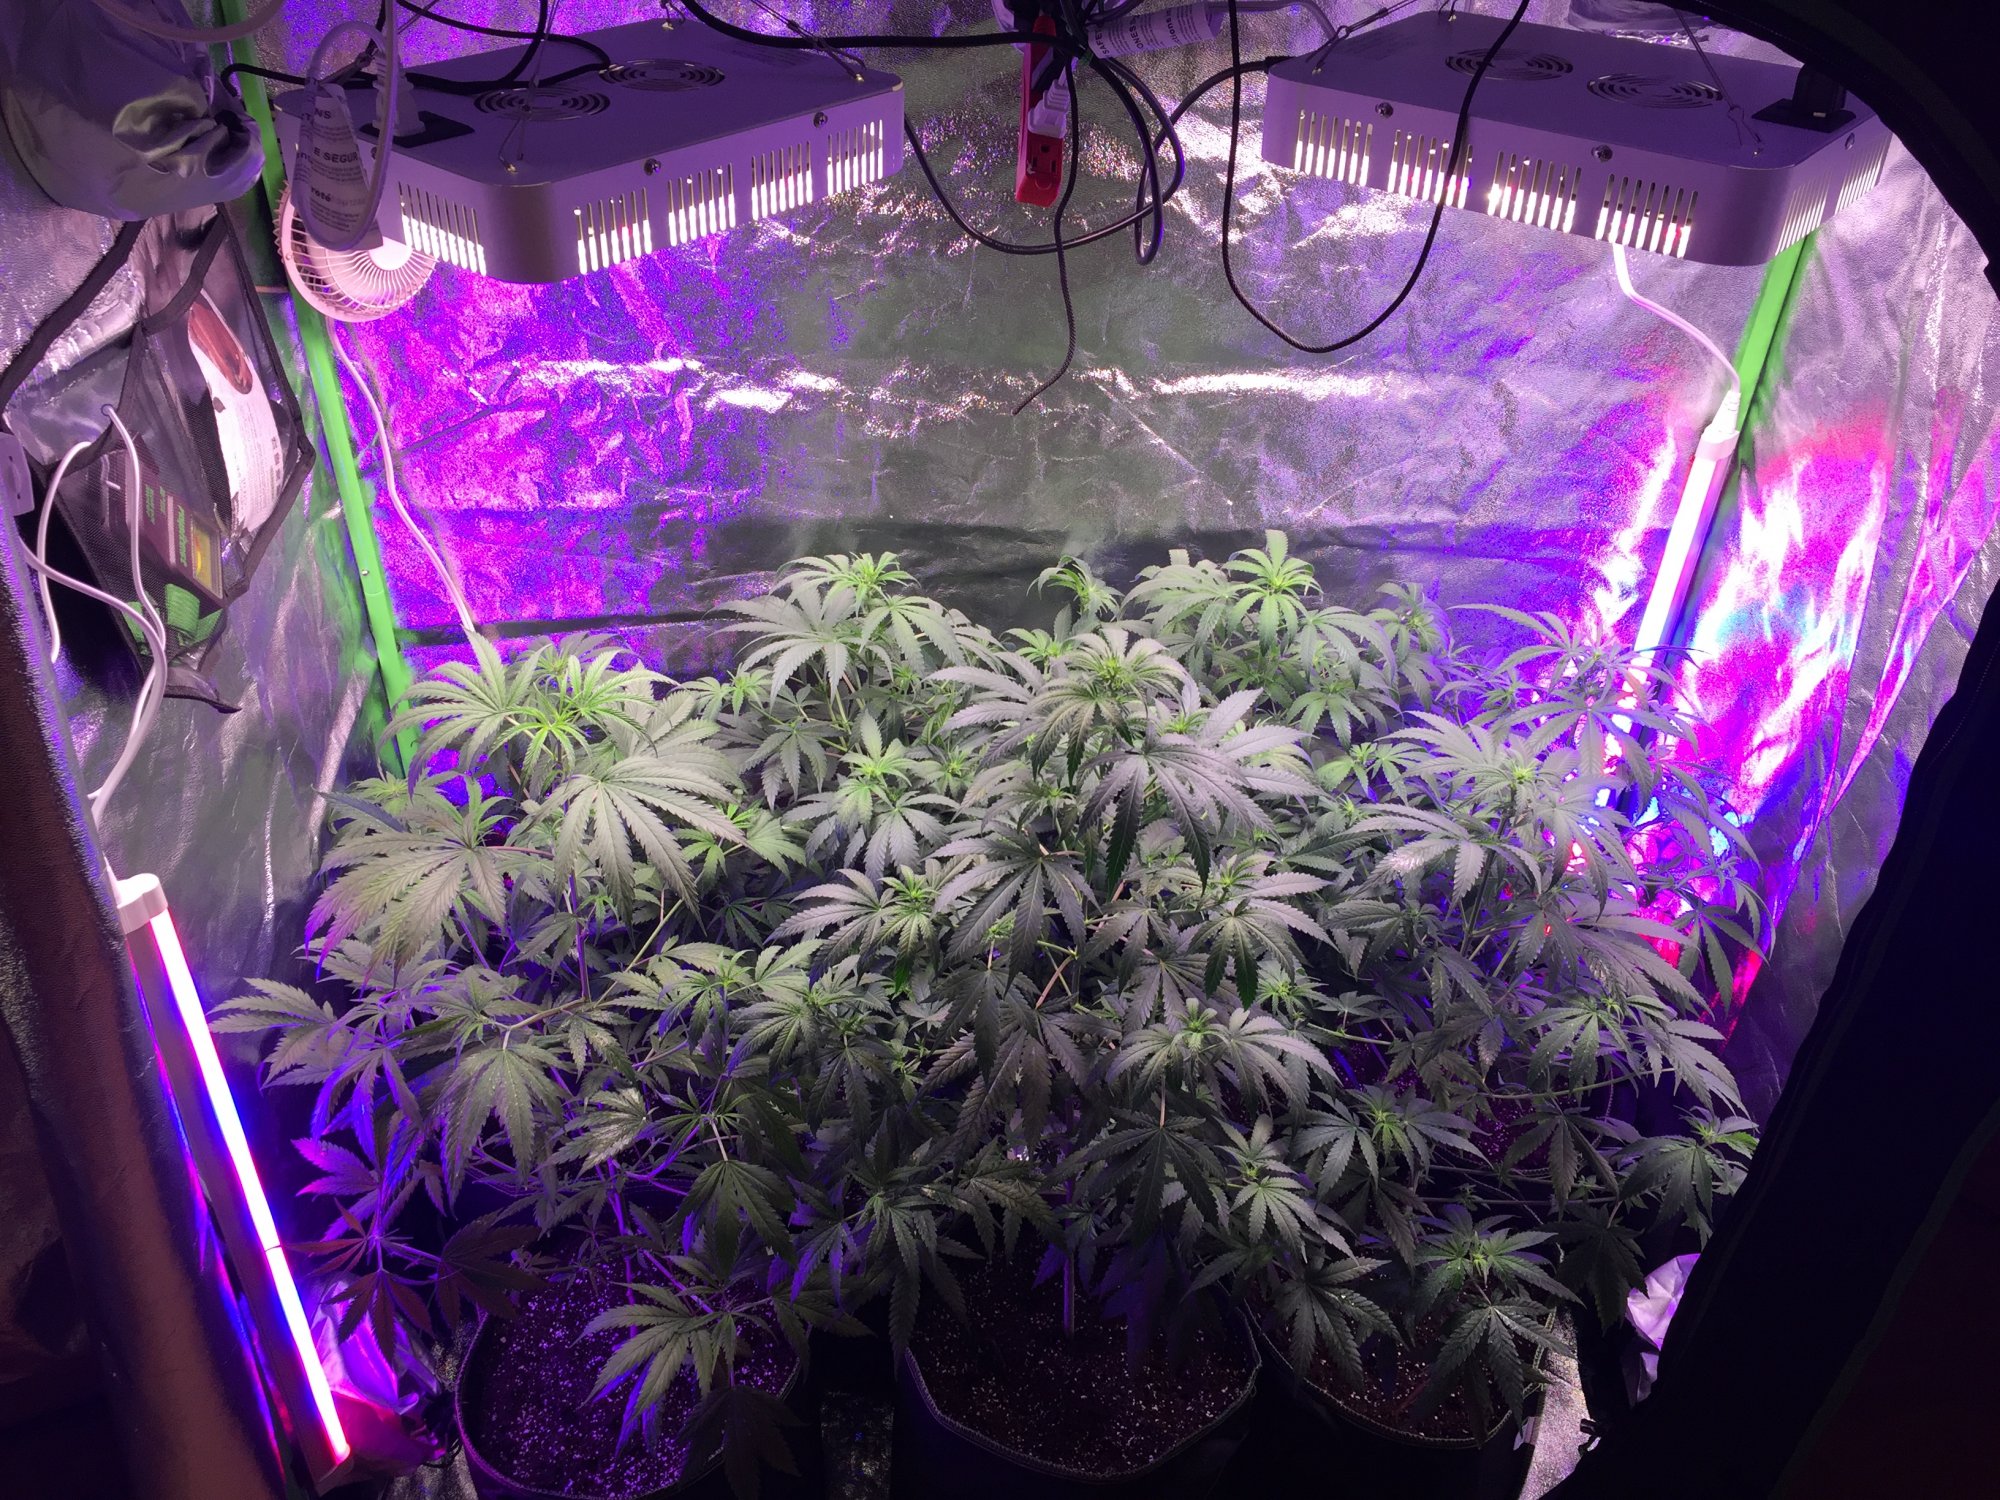 One week and two days into flower